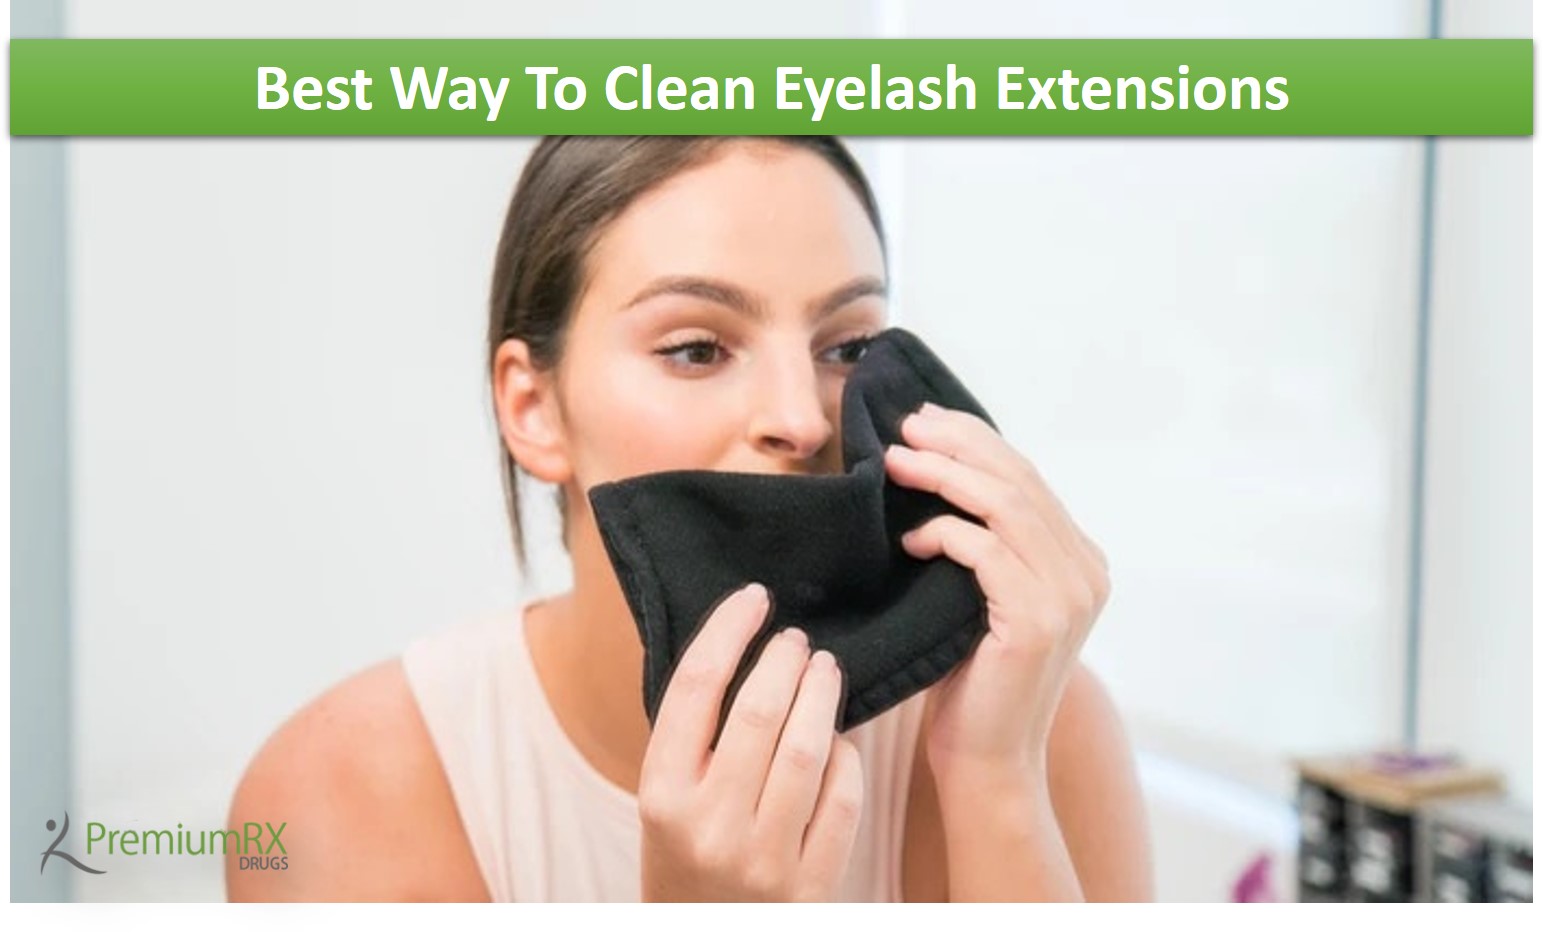 Best Way To Clean Eyelash Extensions